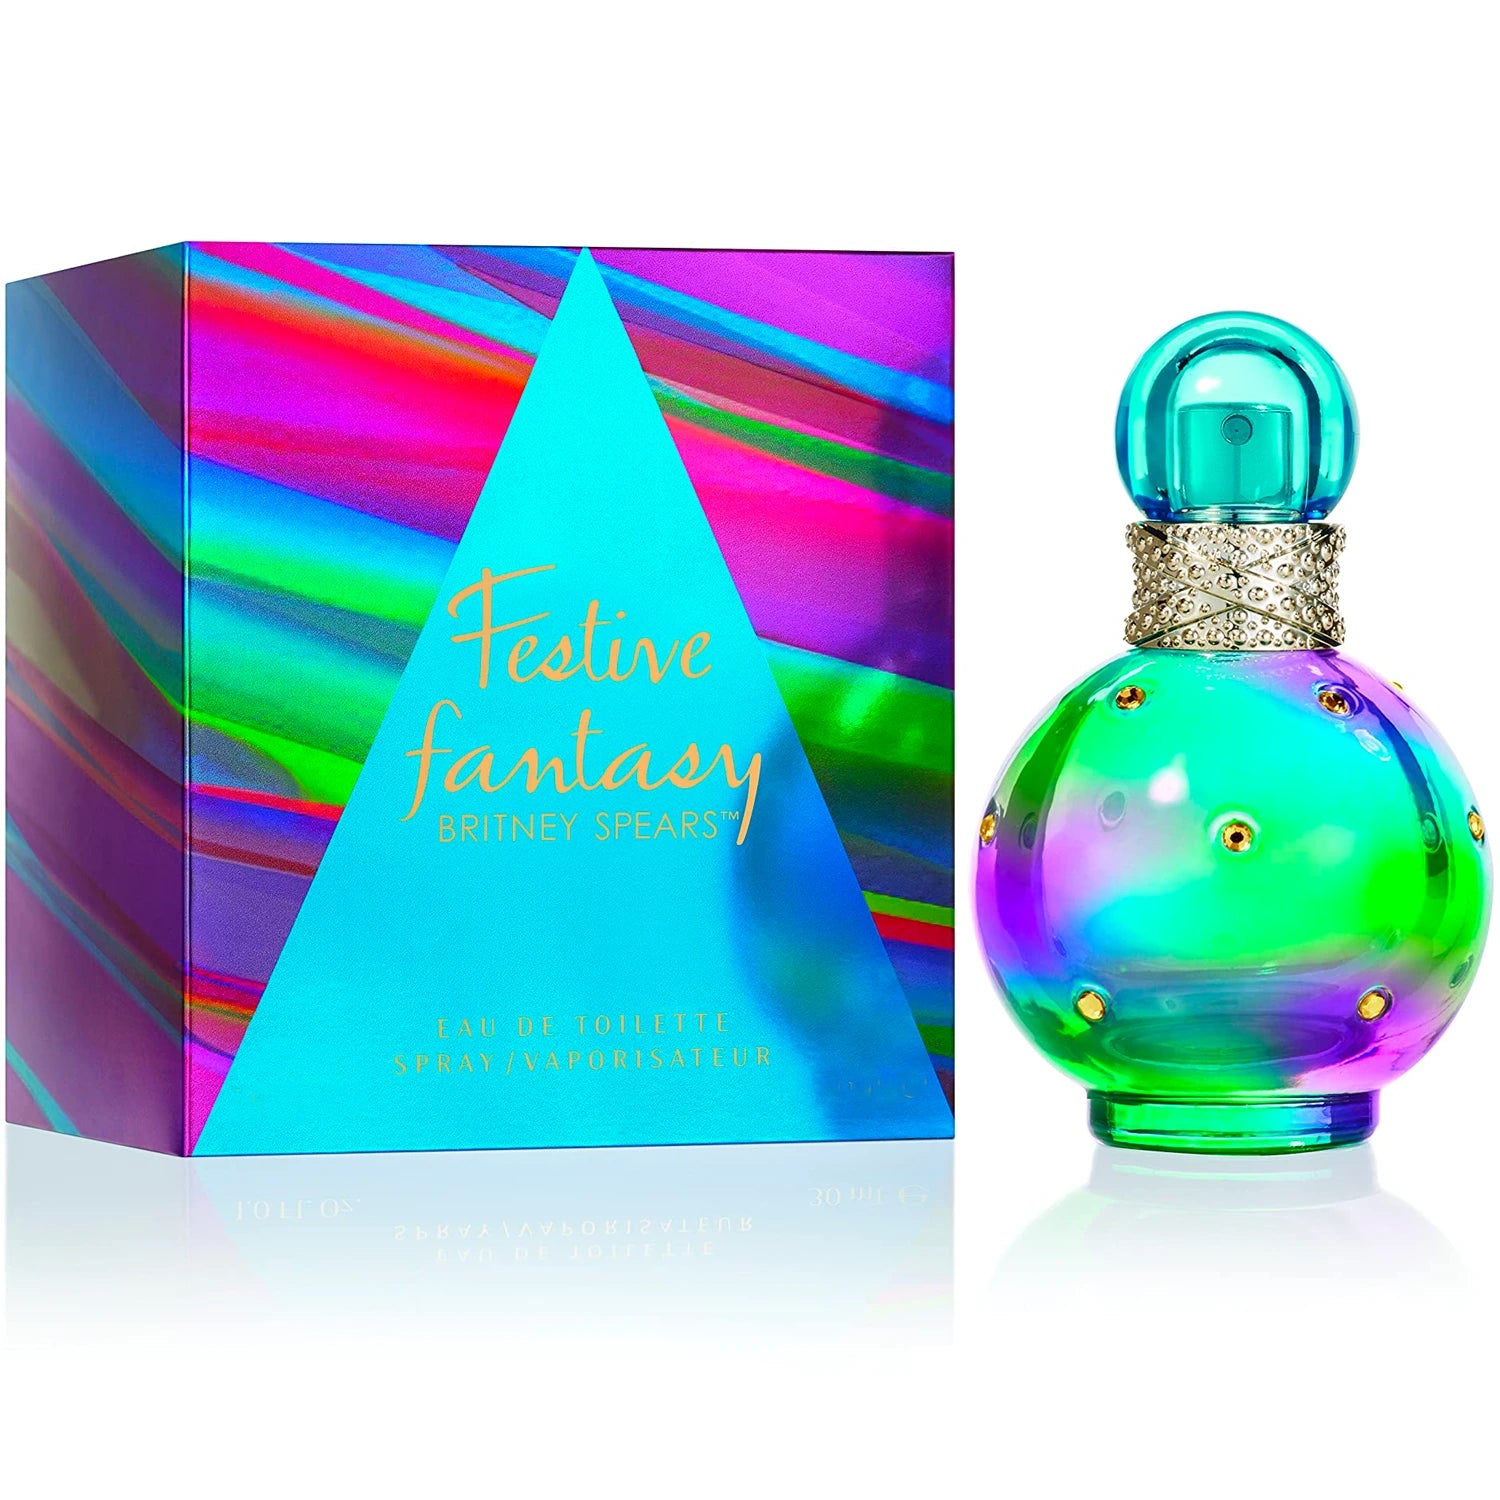 <meta charset="utf-8"><b>Festive Fantasy</b><span> by </span><b>Britney Spears</b><span> is a Floral Fruity fragrance for women. This is a new fragrance. </span><b>Festive Fantasy</b><span> was launched in 2020. Top notes are Dewberry, Sour Cherry and Plum; middle notes are Freesia, Jasmine and Lily; base notes are Sugar, Vanilla, Sandalwood and Musk.</span>